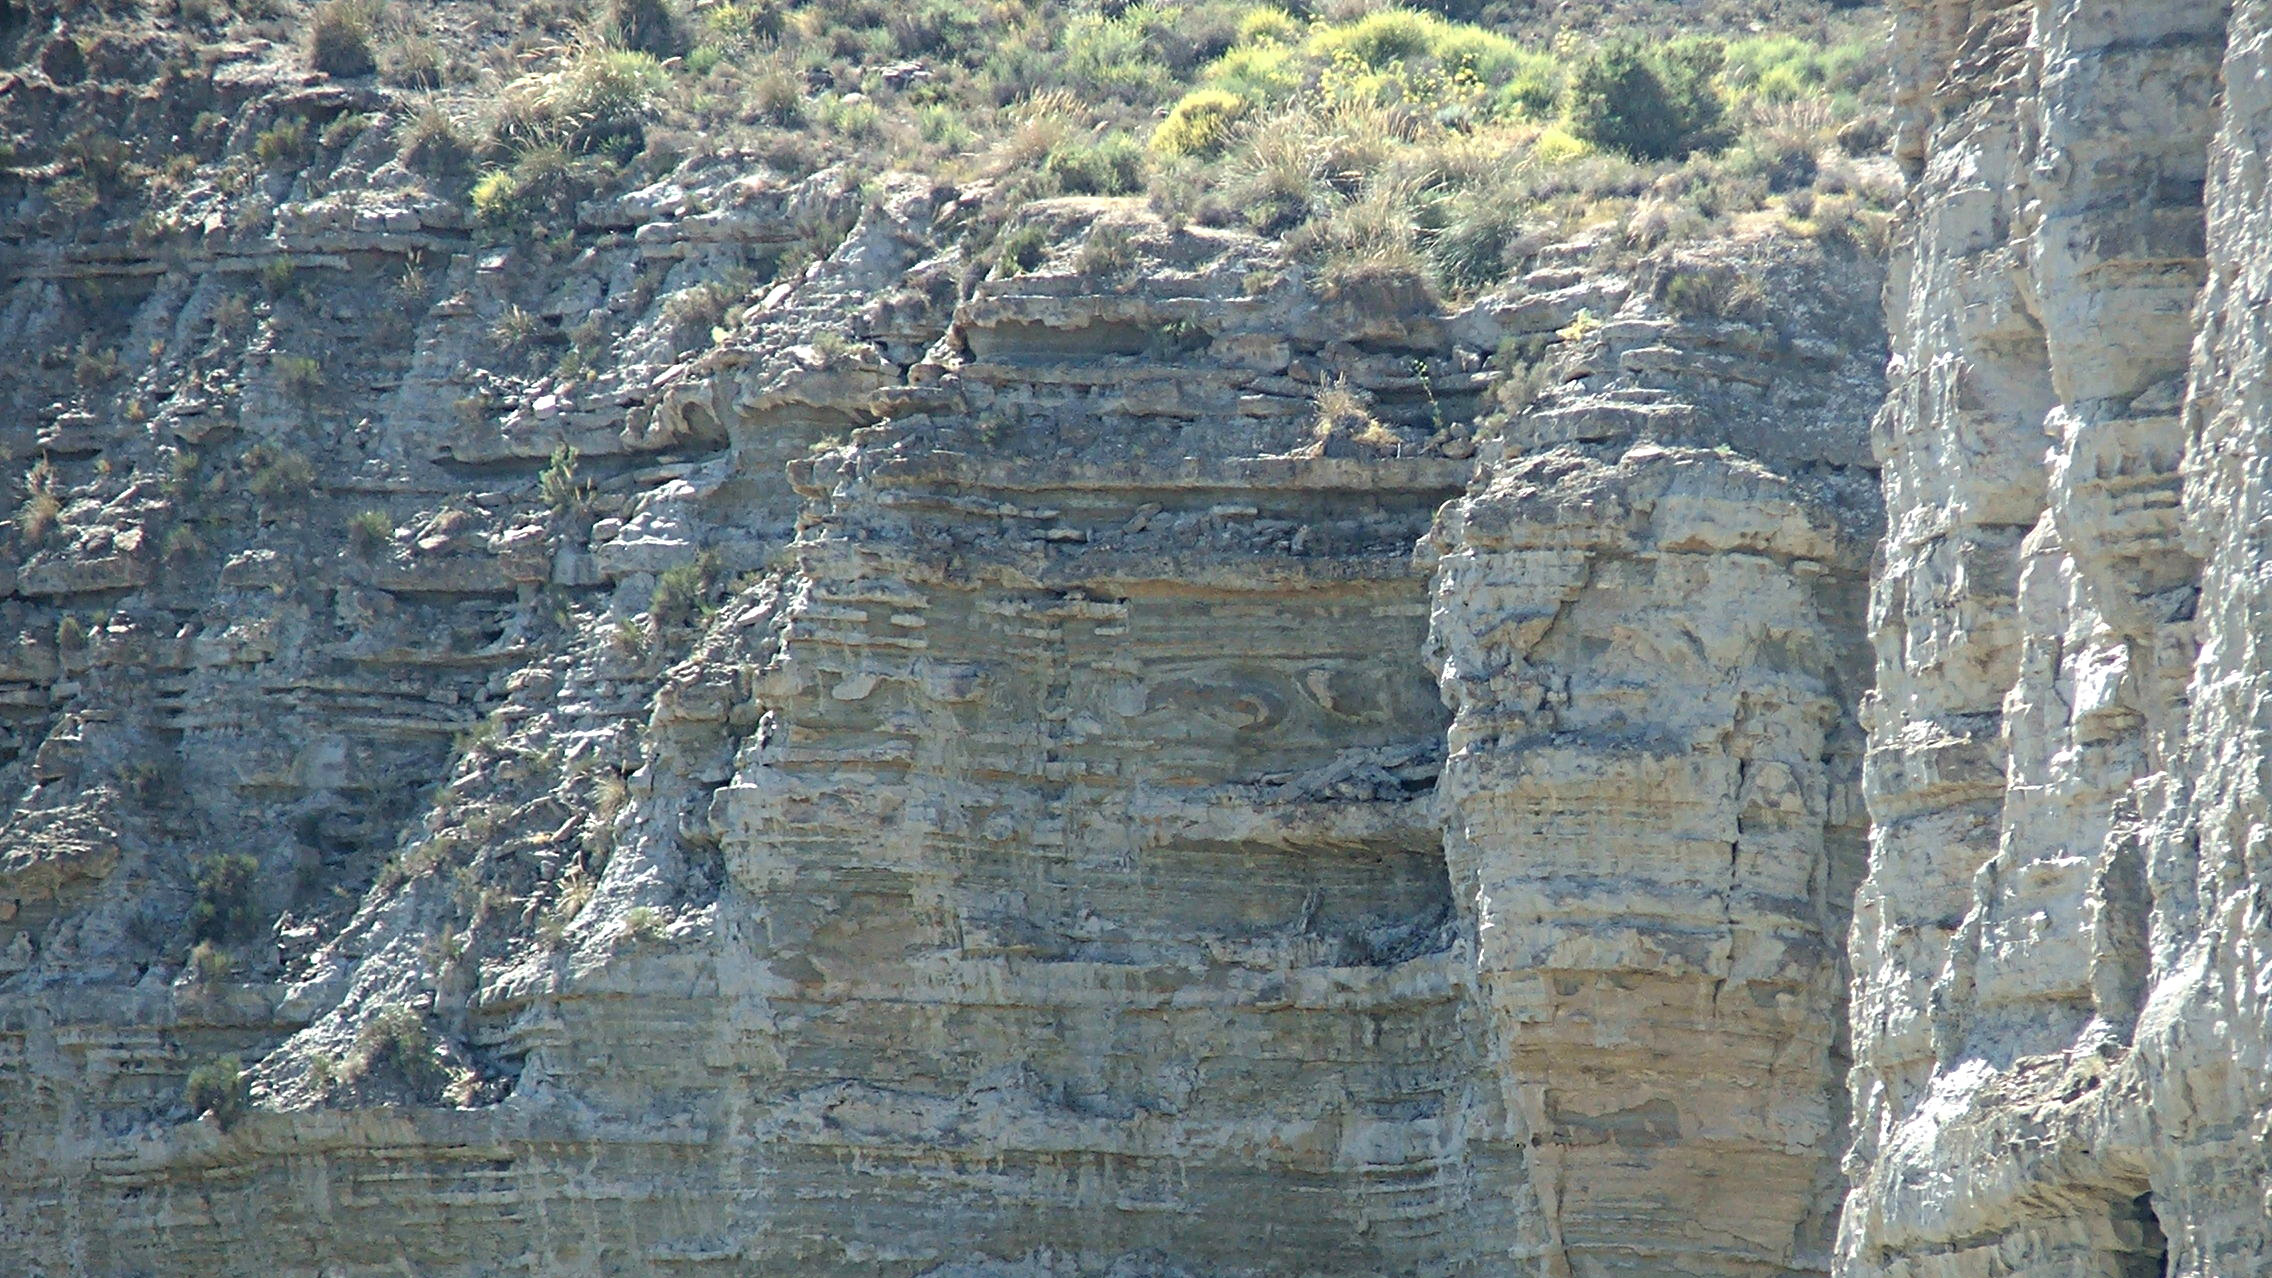 Ancient geological deposits seem to match models of Milankovitch cycles.